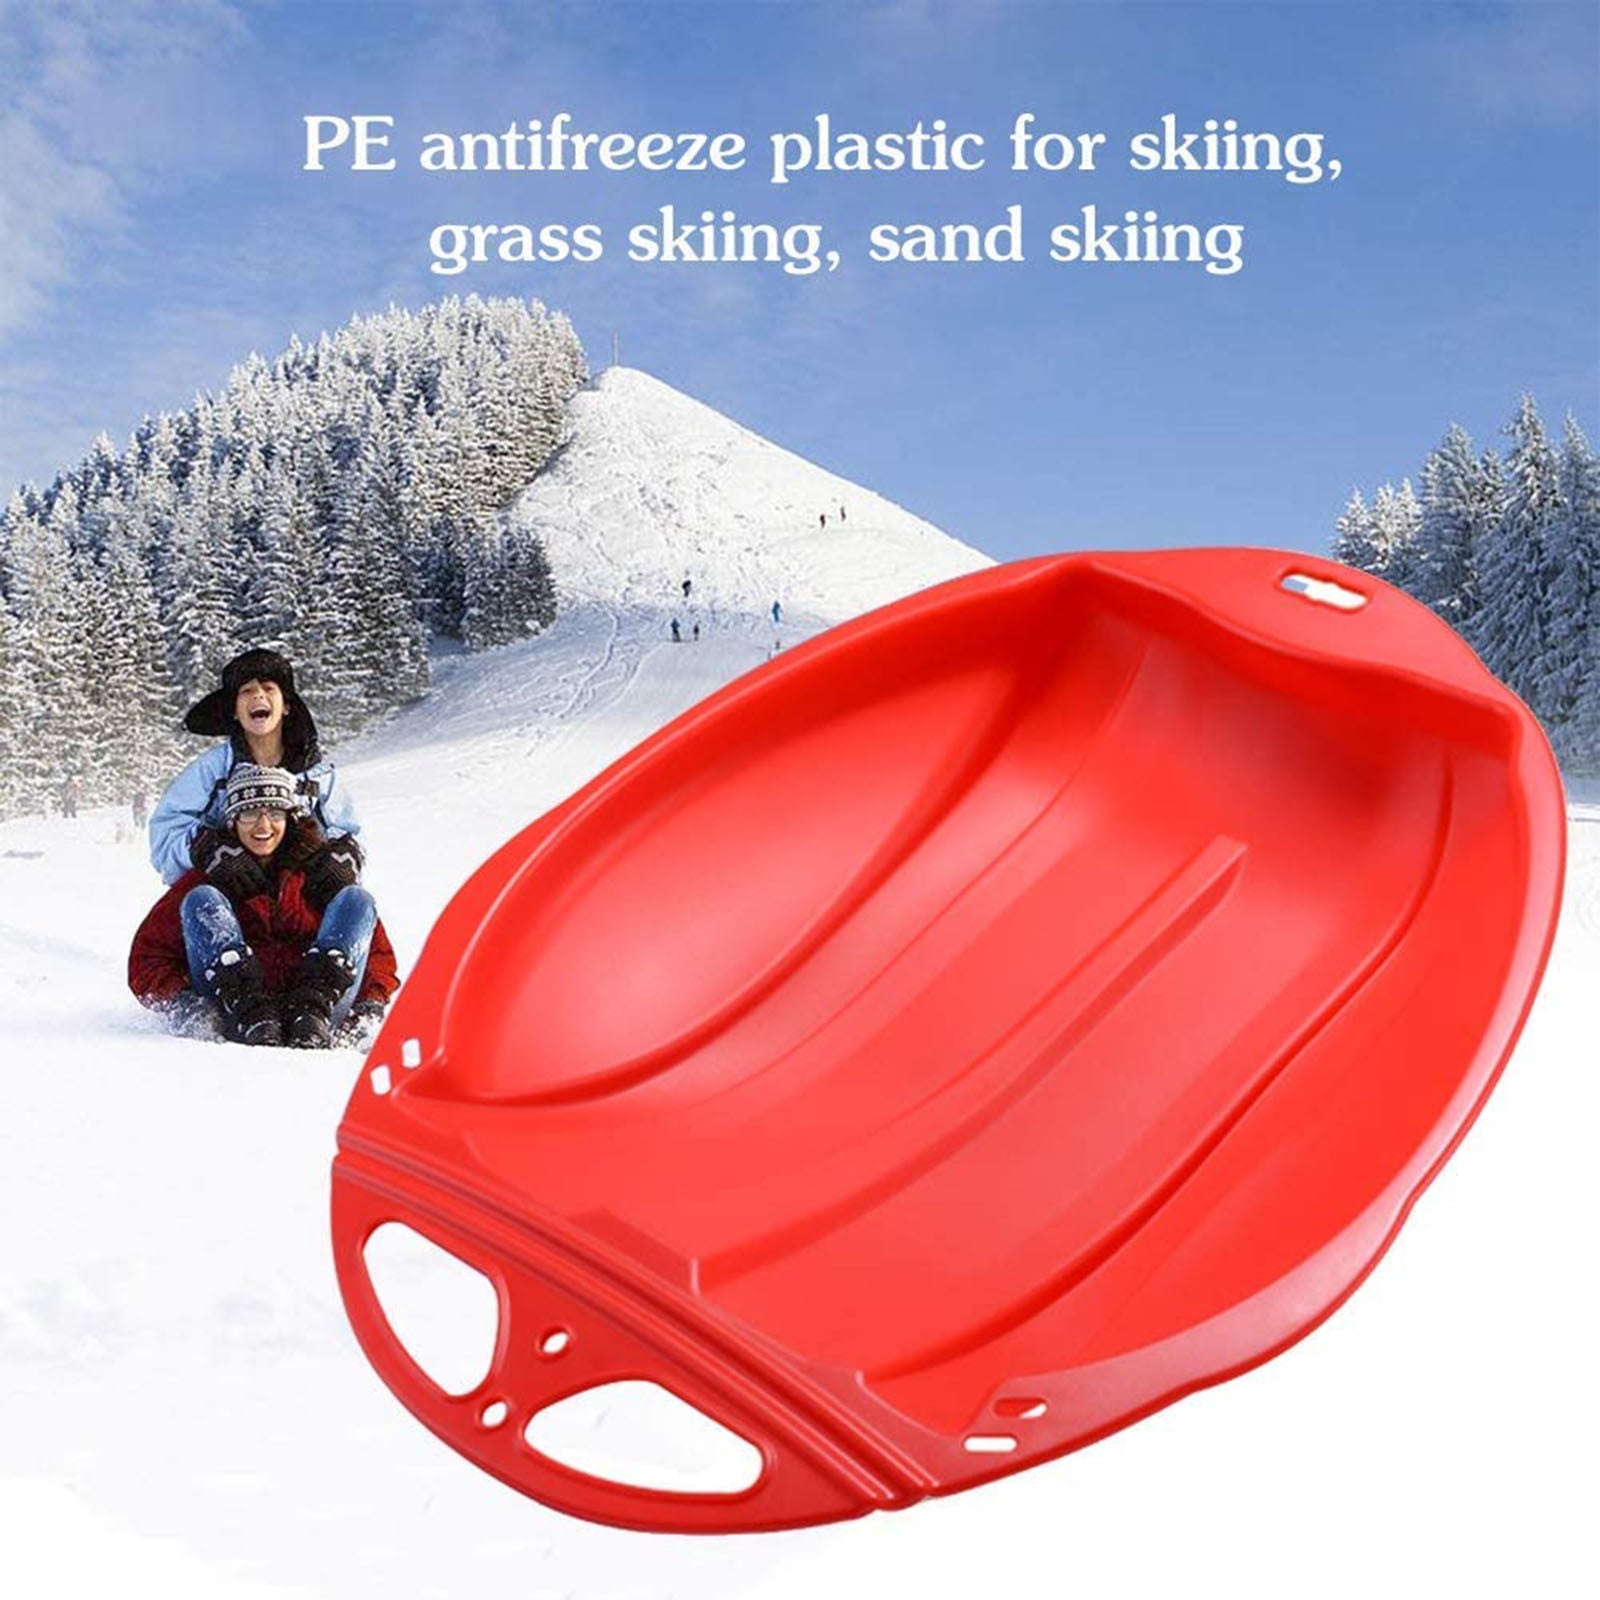 Portable Snow Grass Sand Board Ski Pad Snowboard for Kids & Adult Outdoor Sports Winter Plastic Skiing Boards Tanwpn Snow Sled Board 